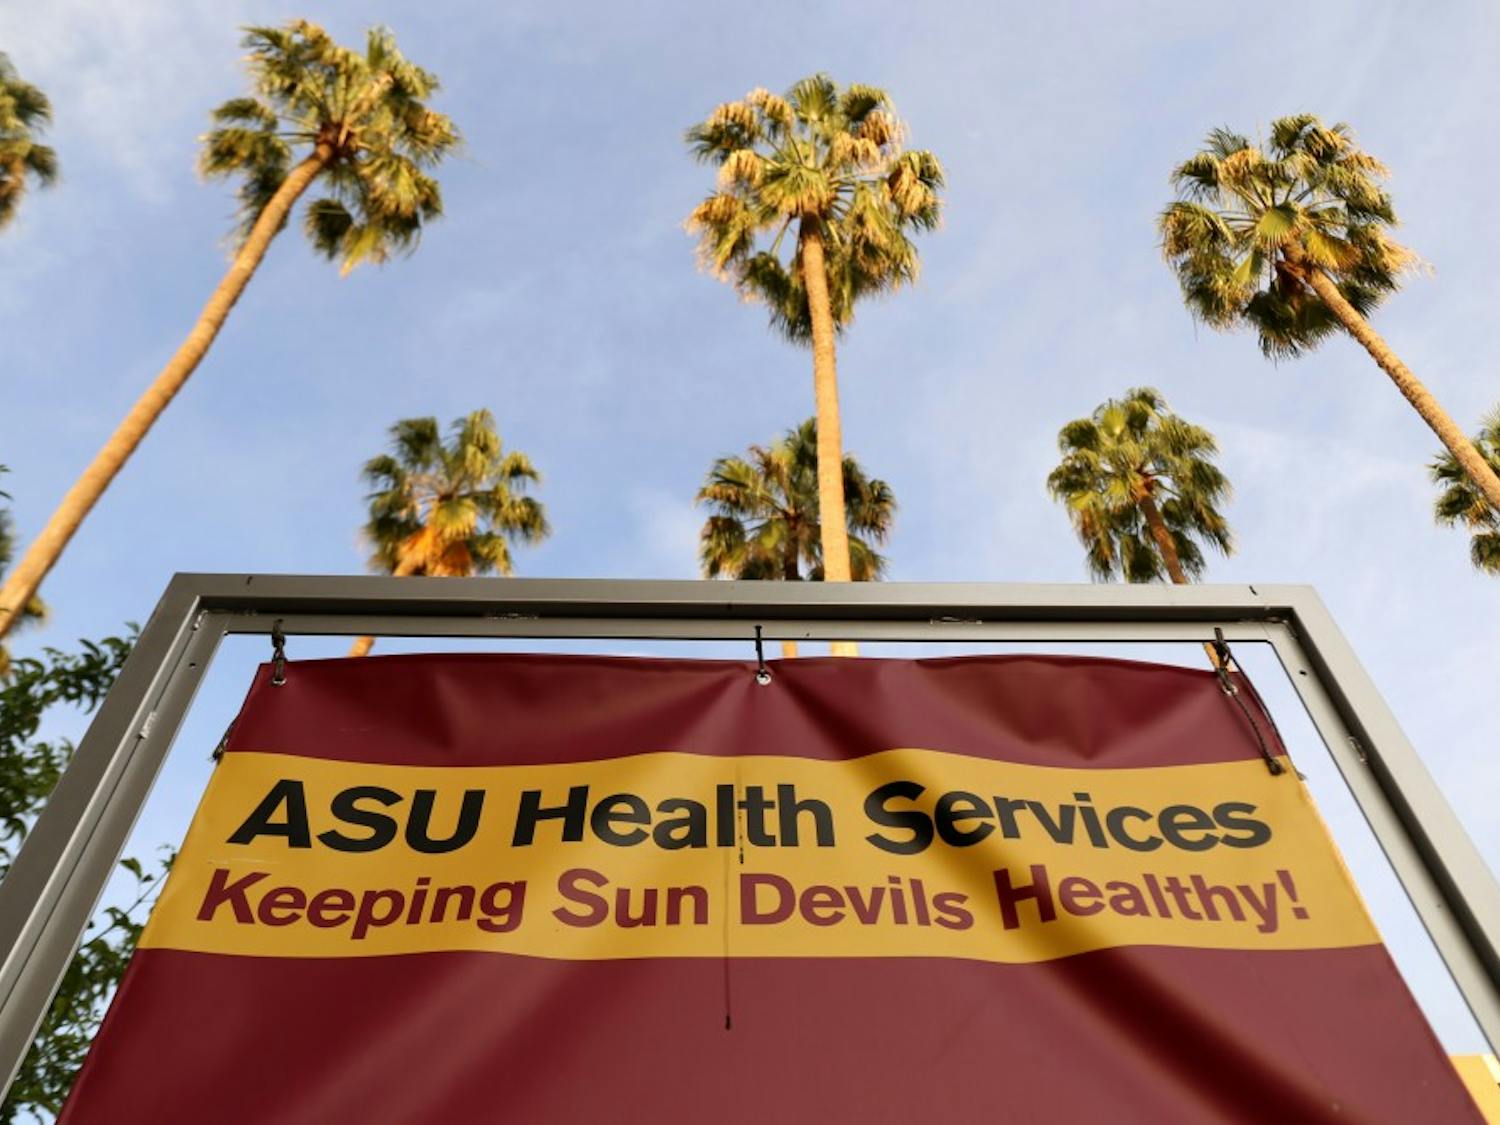 A sign on Palm Walk advertises ASU Health Services is pictured on Tuesday, April 5, 2016.